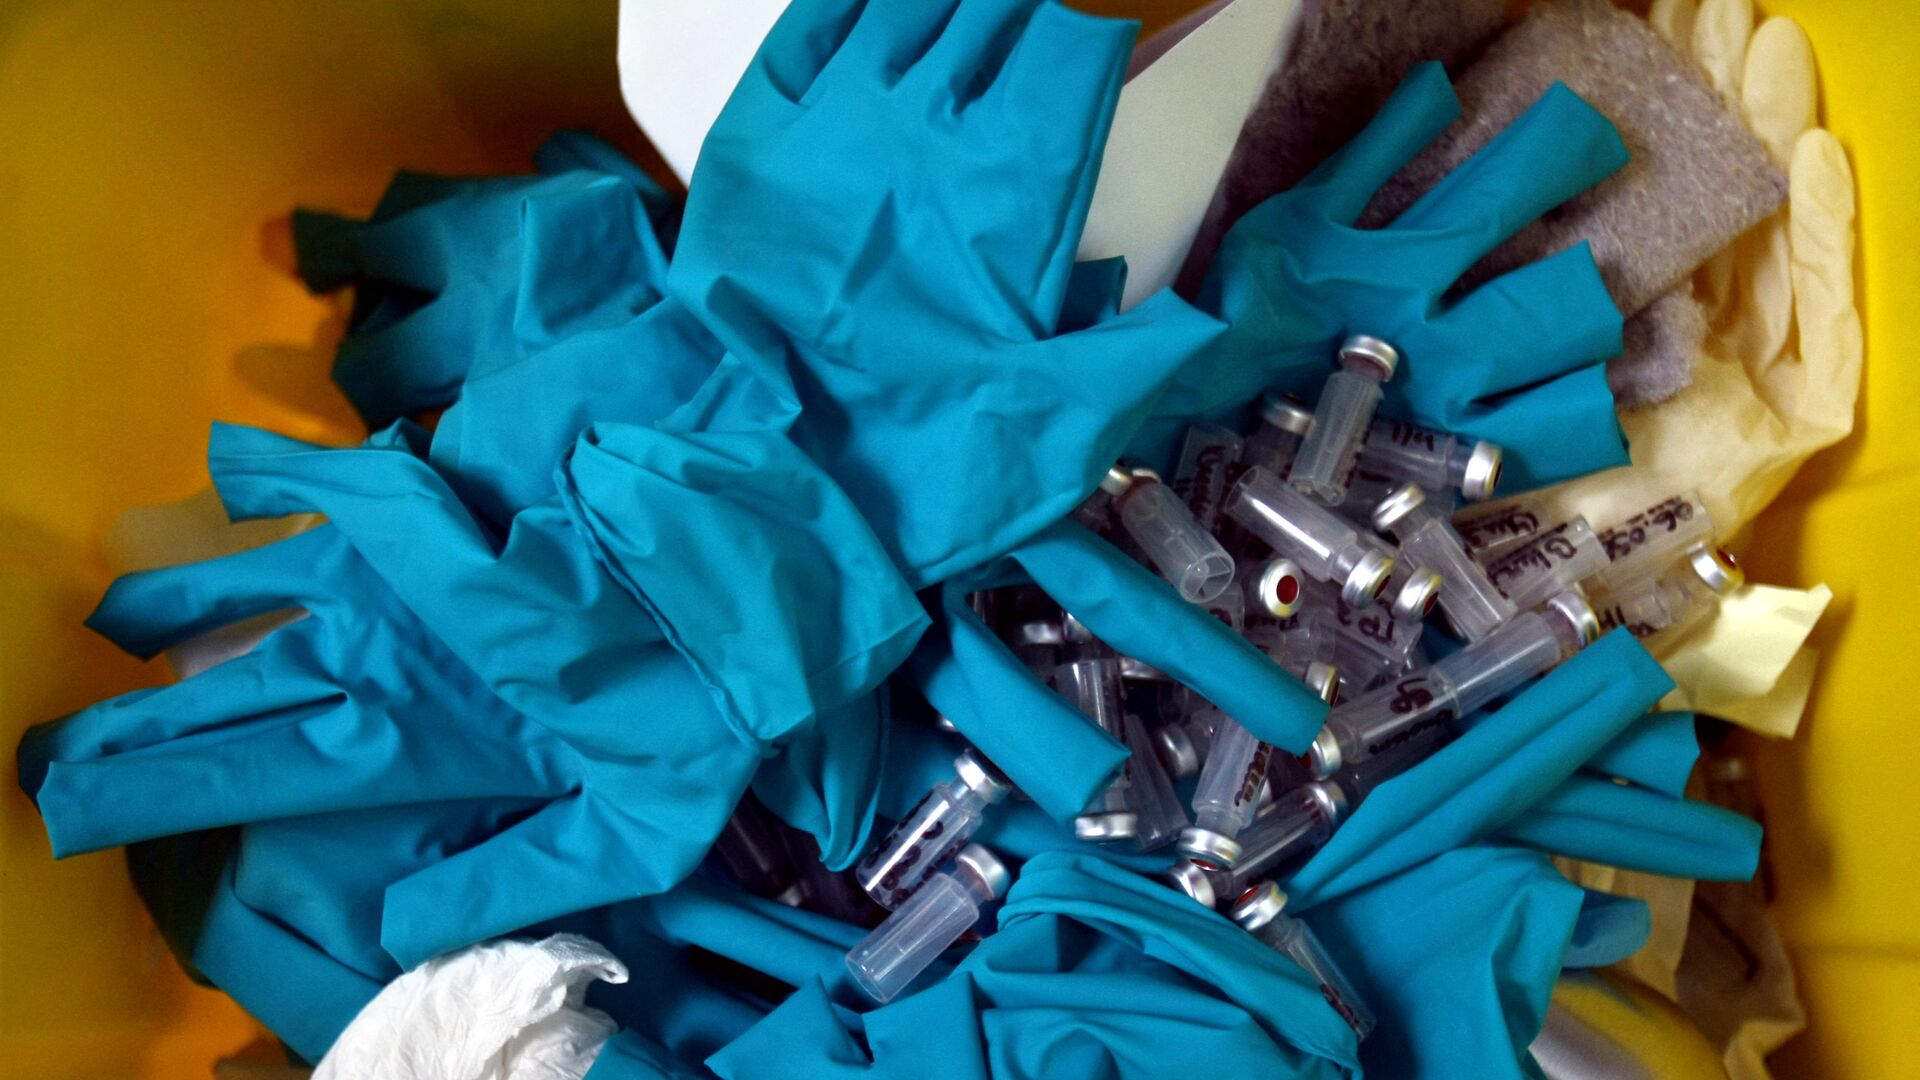 A picture taken at the French national anti-doping laboratory, on 23 June 2008 in Chatenay-Malabry, outside Paris, shows a waste bin filled with gloves, syringes and test tubes used for blood samples. - Sputnik International, 1920, 04.06.2021